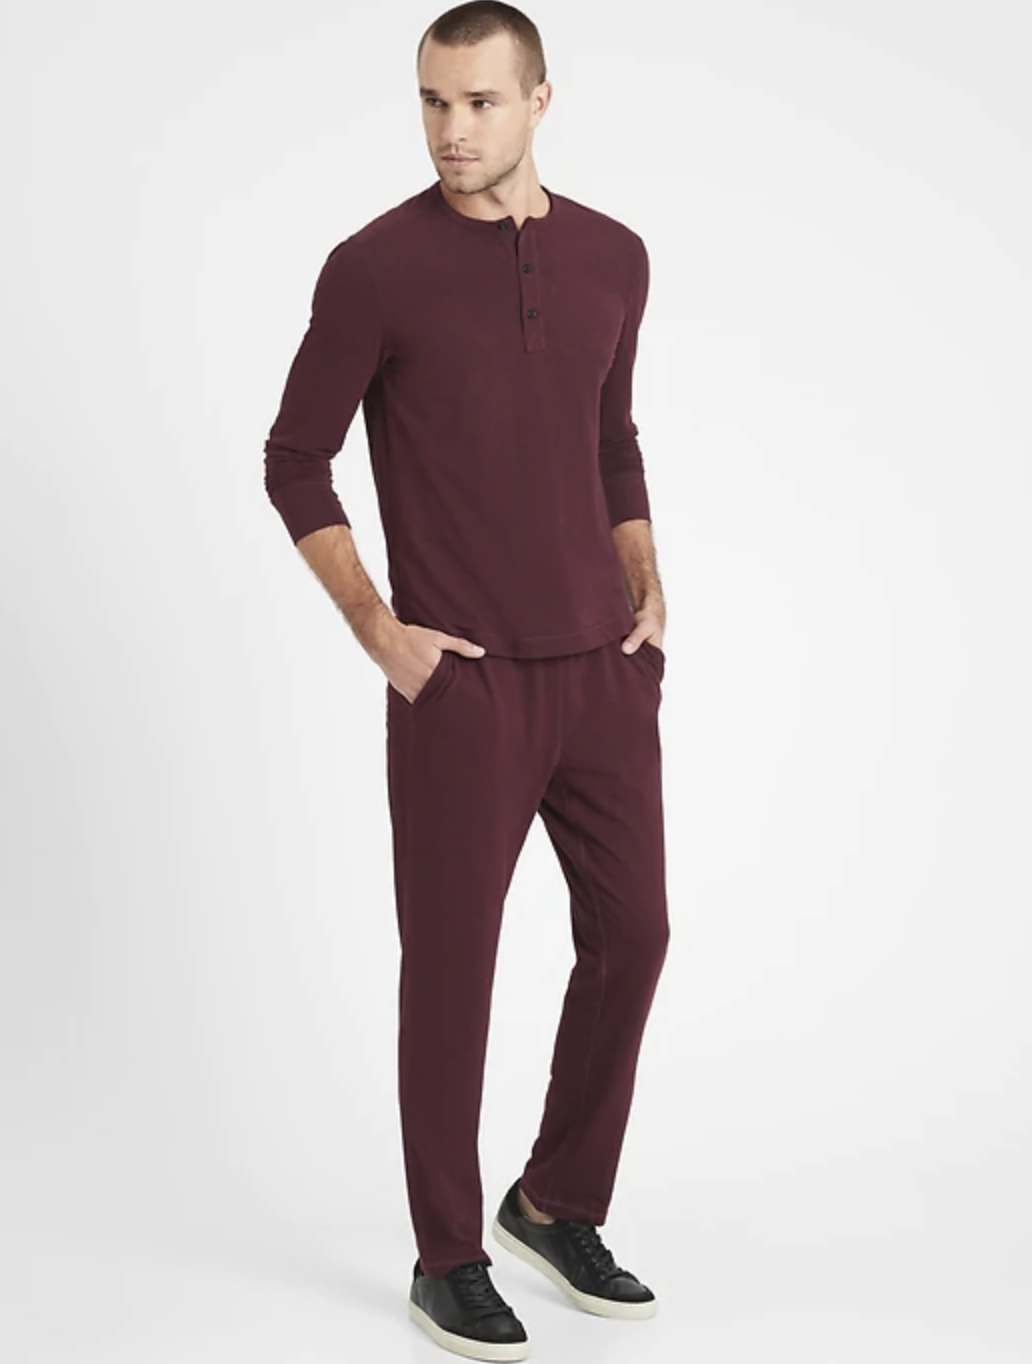 male model wearing a matching burgundy lounge top and bottom with black sneakers